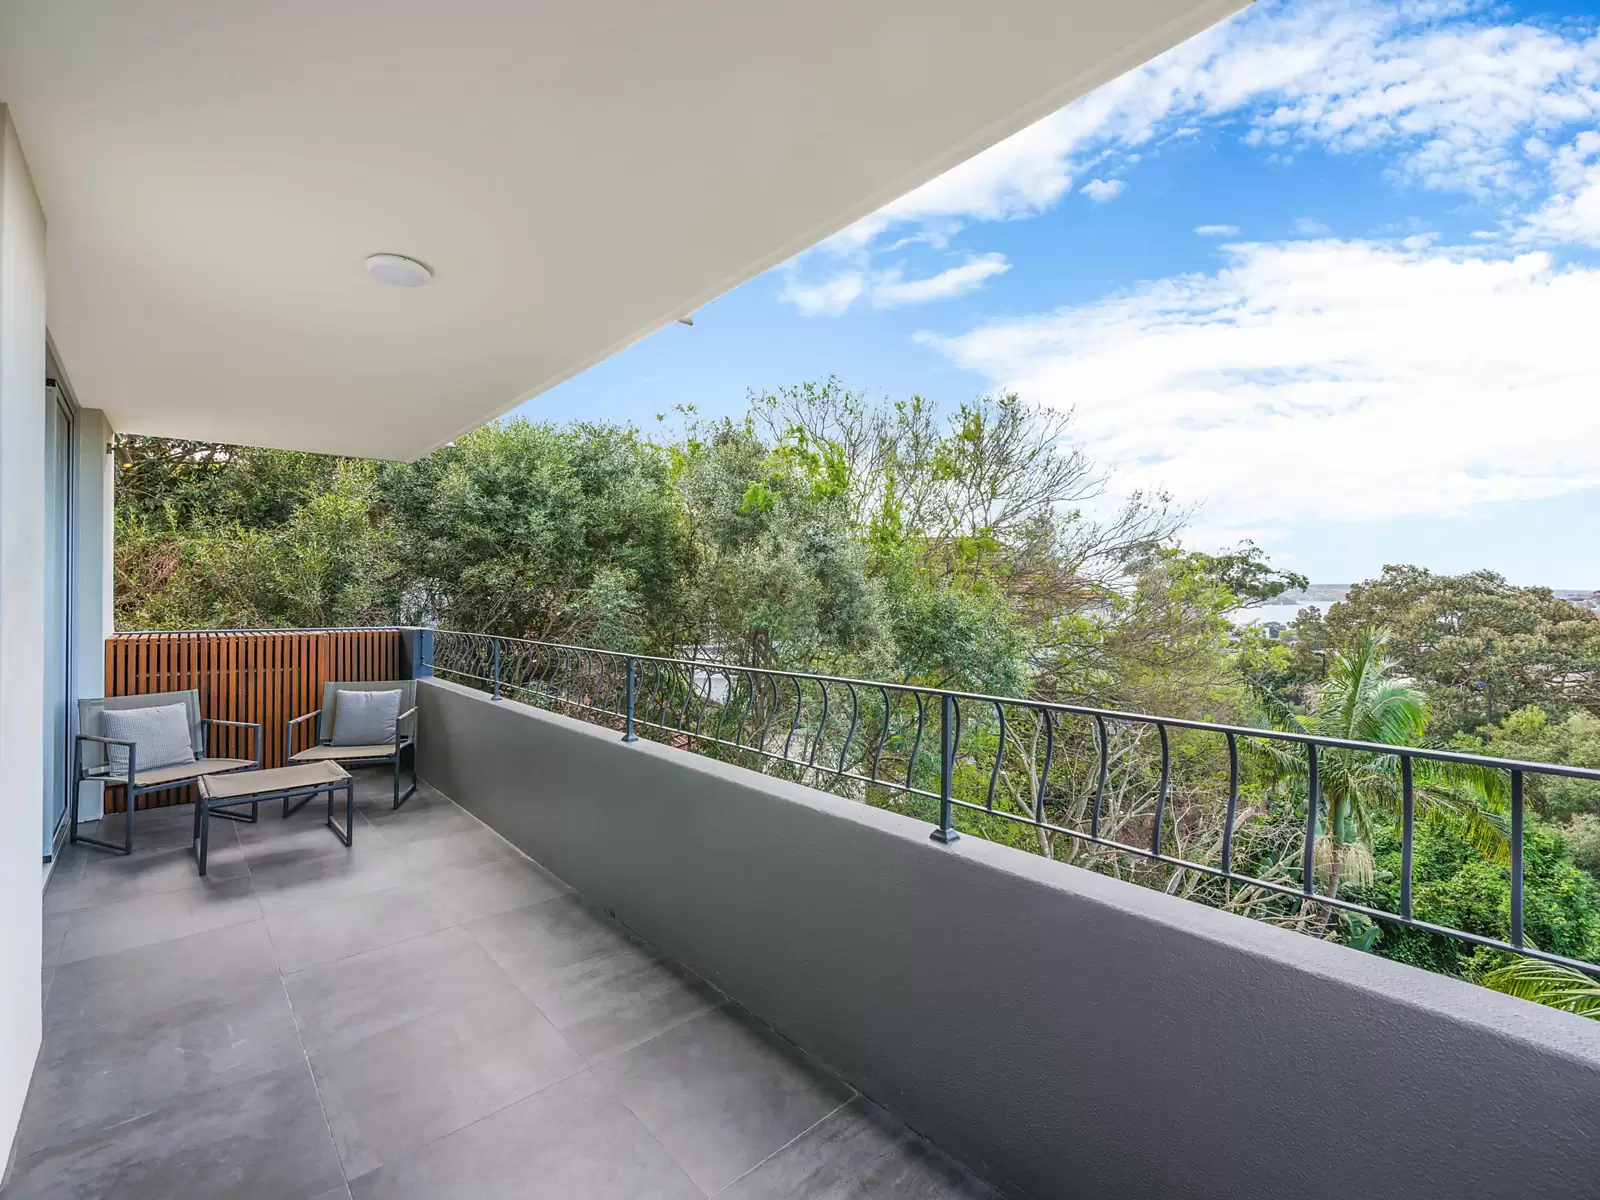 Photo #17: 13/321 Edgecliff Road, Woollahra - Sold by Sydney Sotheby's International Realty